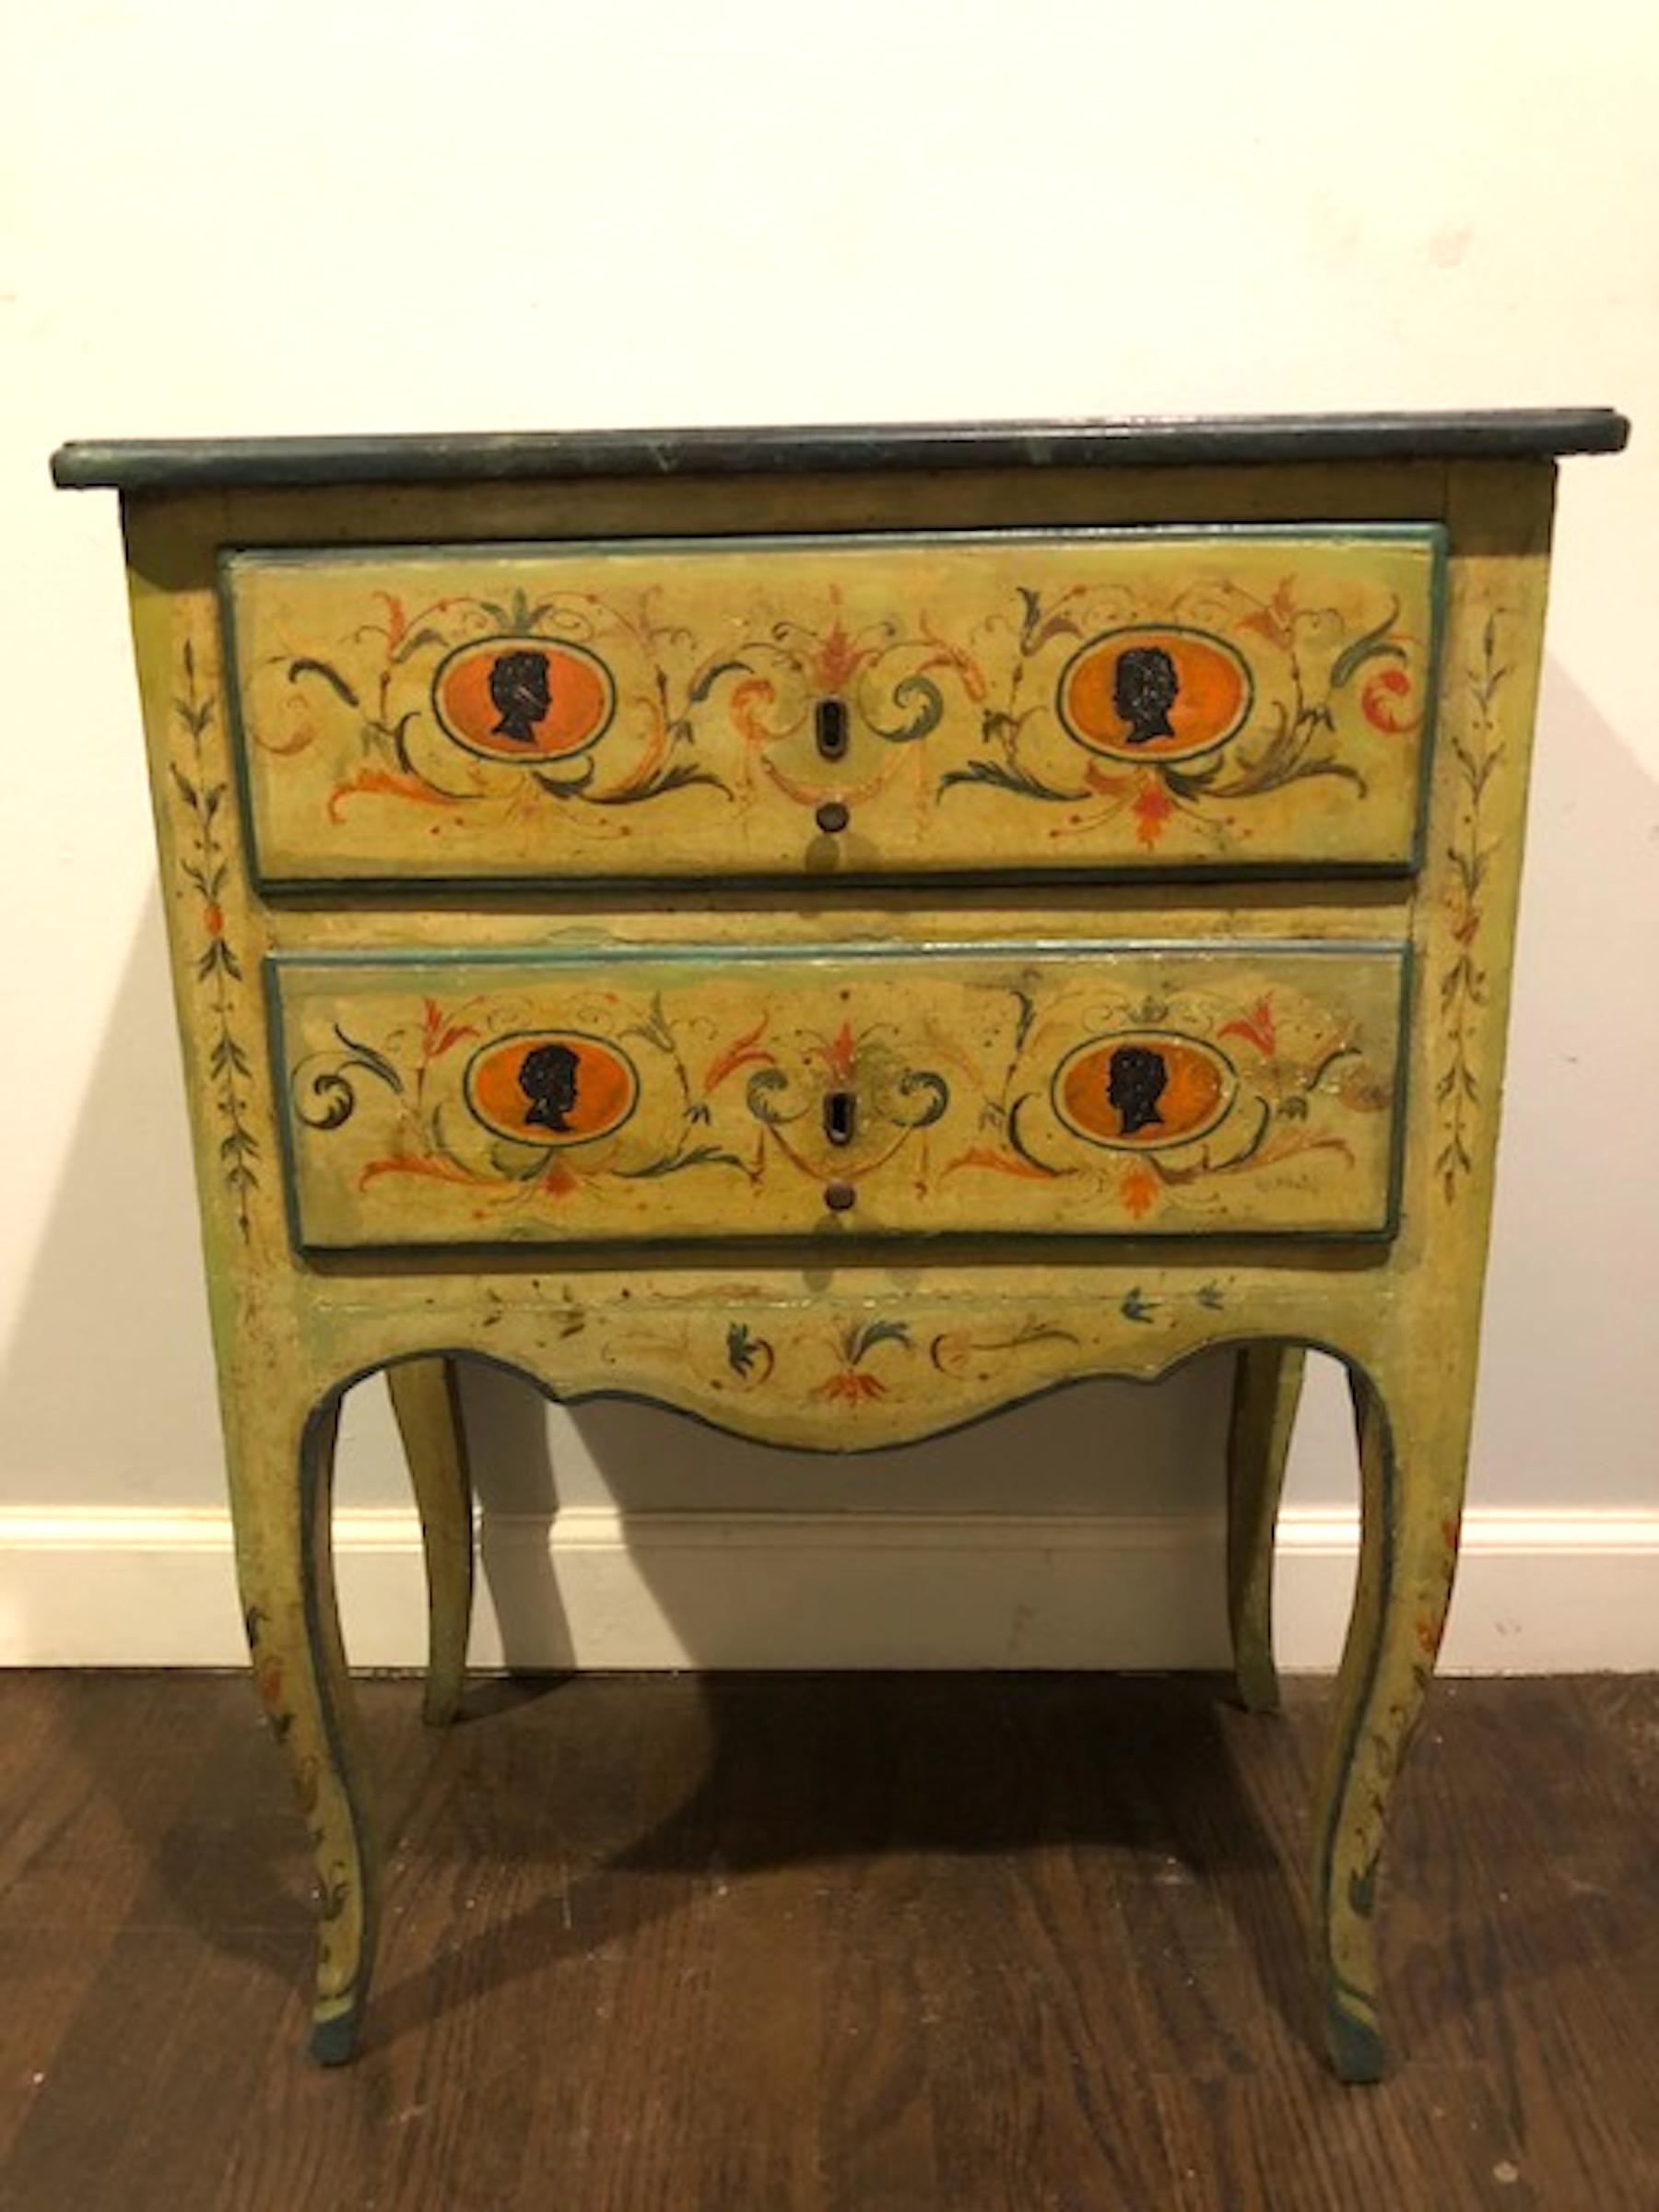 18th century neoclassical painted Italian commode, with marbleized top, fitted with two drawers with various portrait medallions. Beautiful antique patina, shows the age, structurally sound.